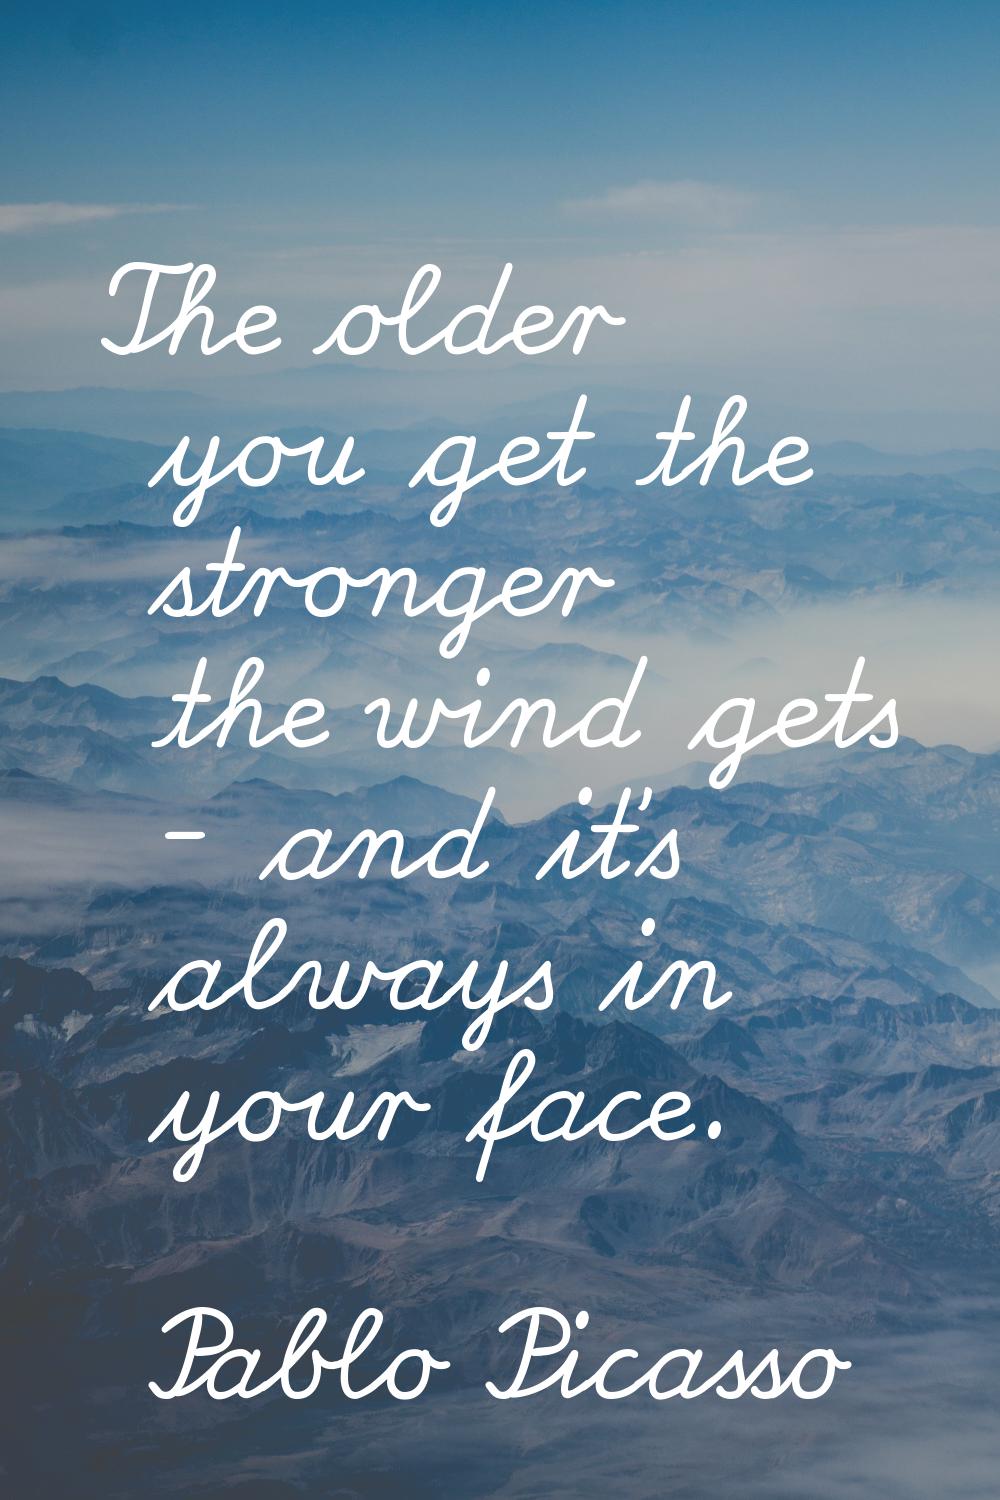 The older you get the stronger the wind gets - and it's always in your face.